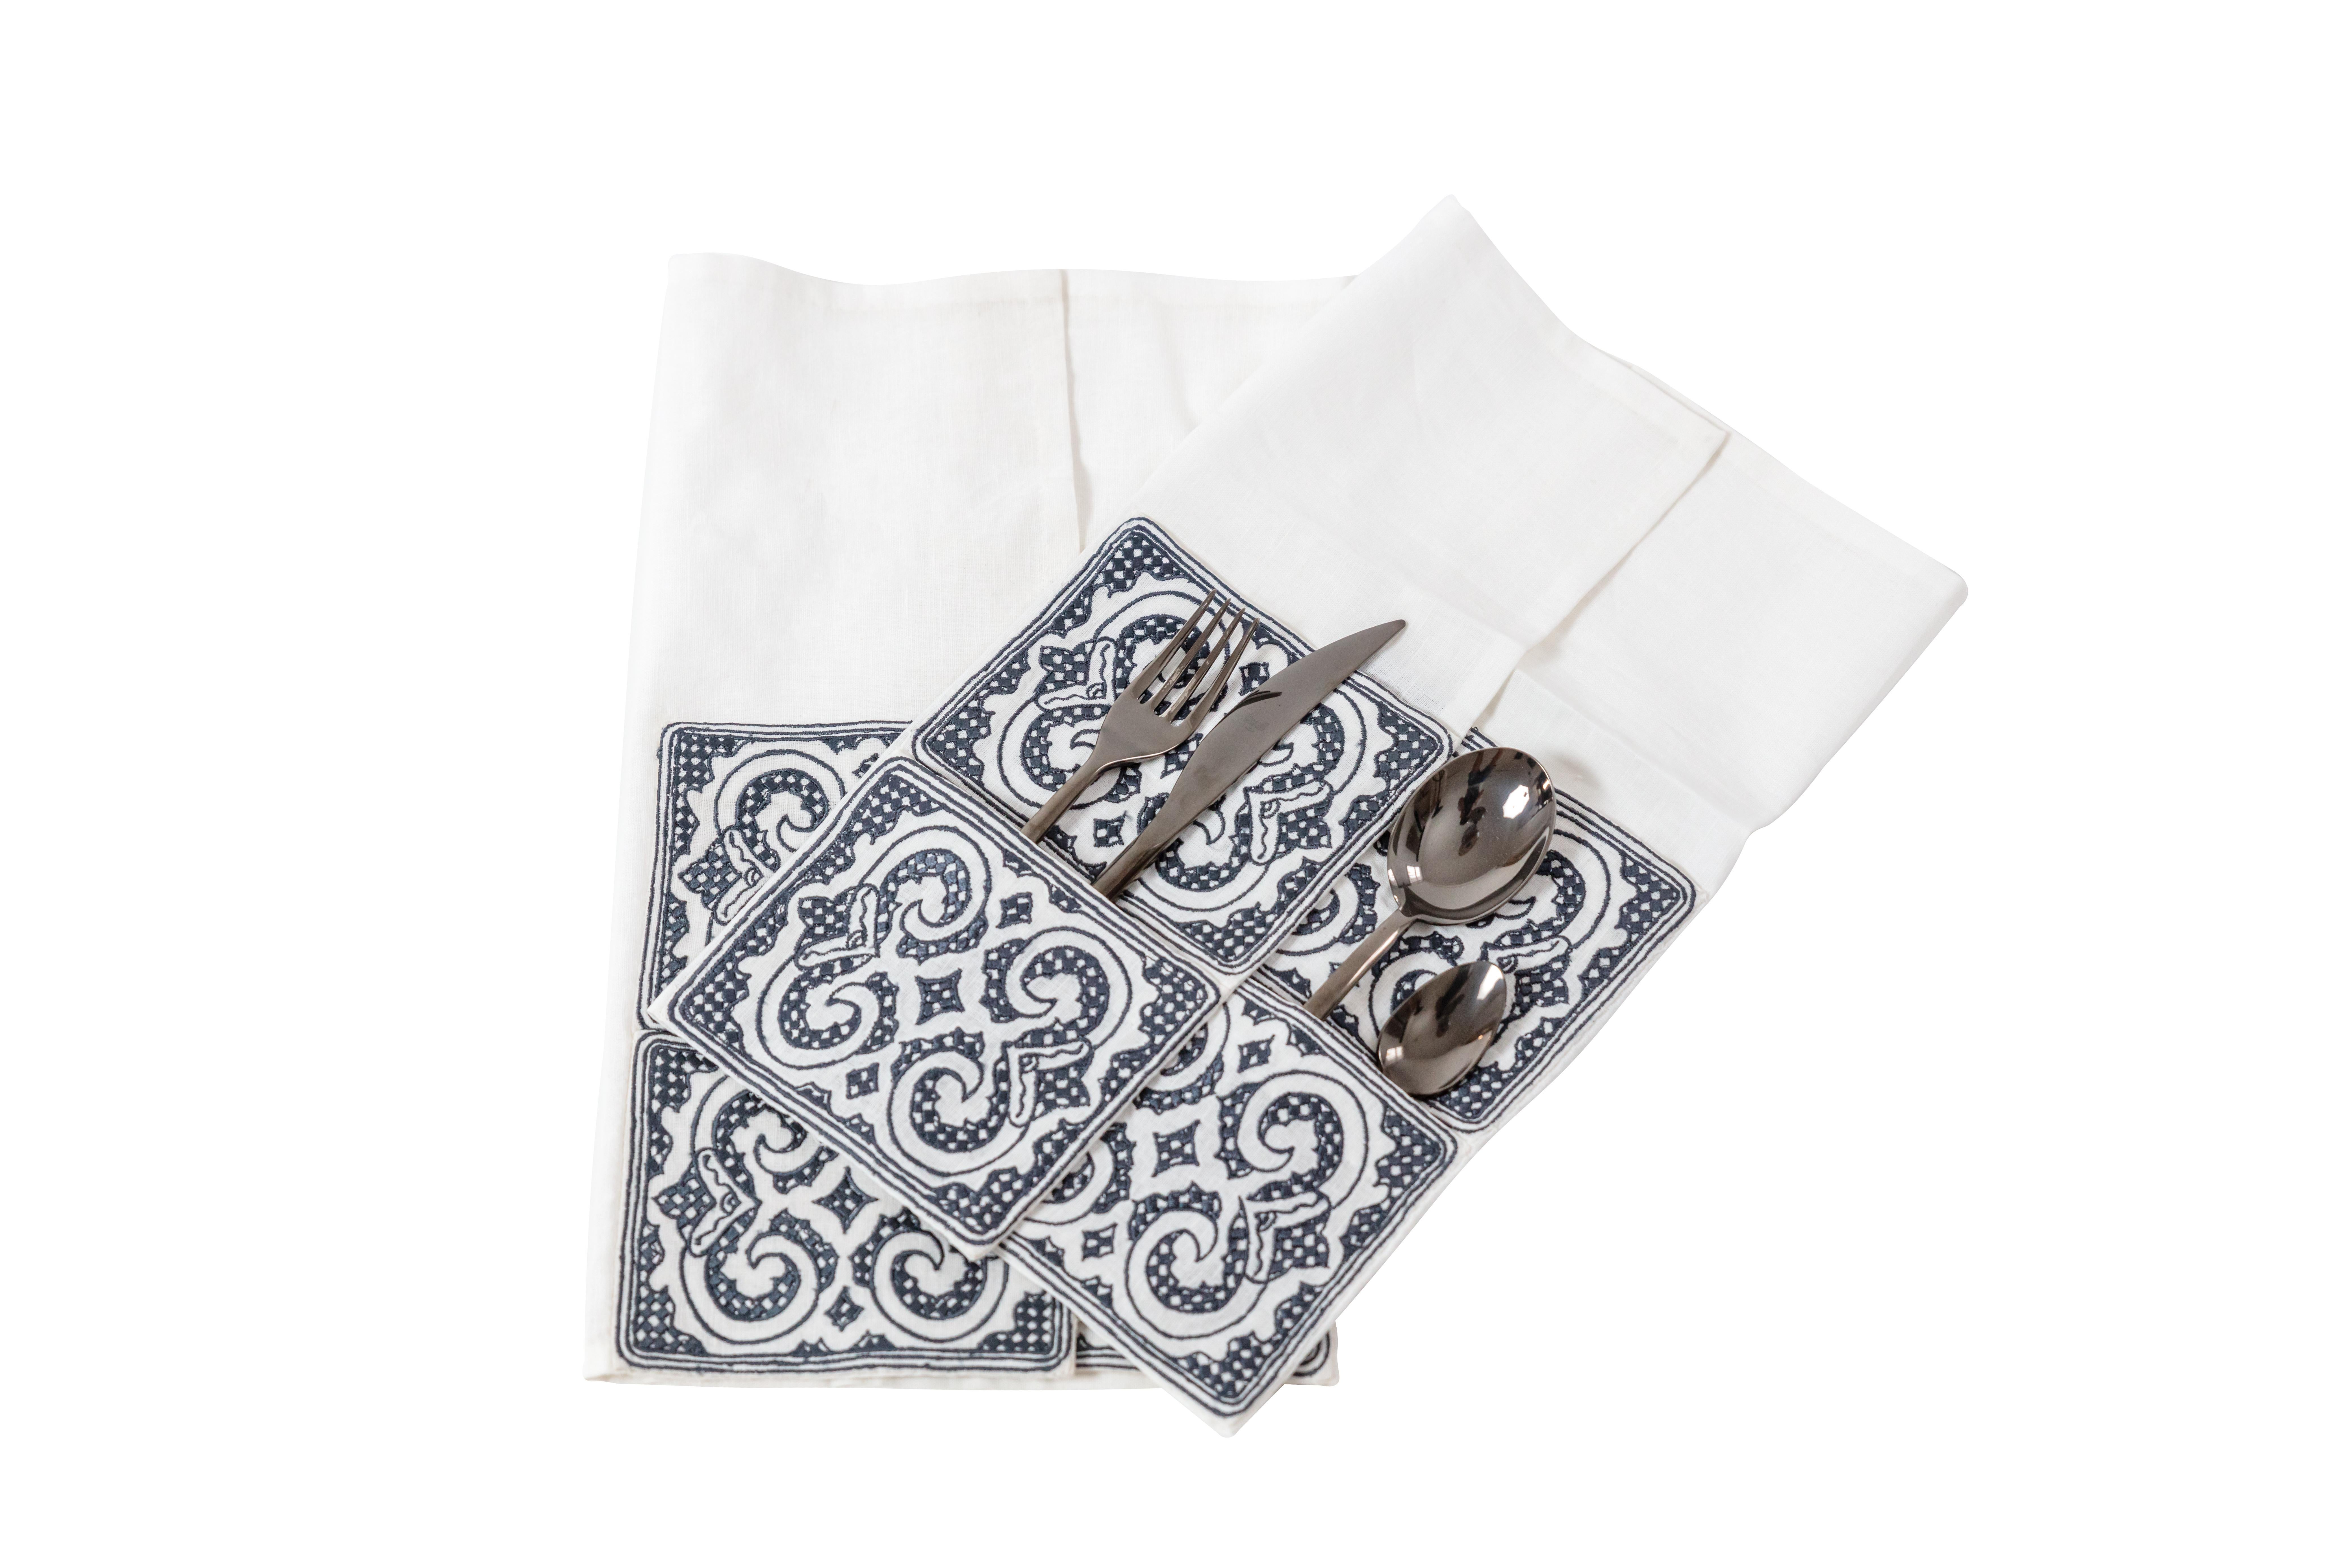 This set of two hand-embroidered linen napkins from SoShiro’s Ainu collection, a collaboration between award-winning artist Toru Kaizawa and Shiro Muchiri, is made with the softest linen and features playful pockets for a creative place setting of